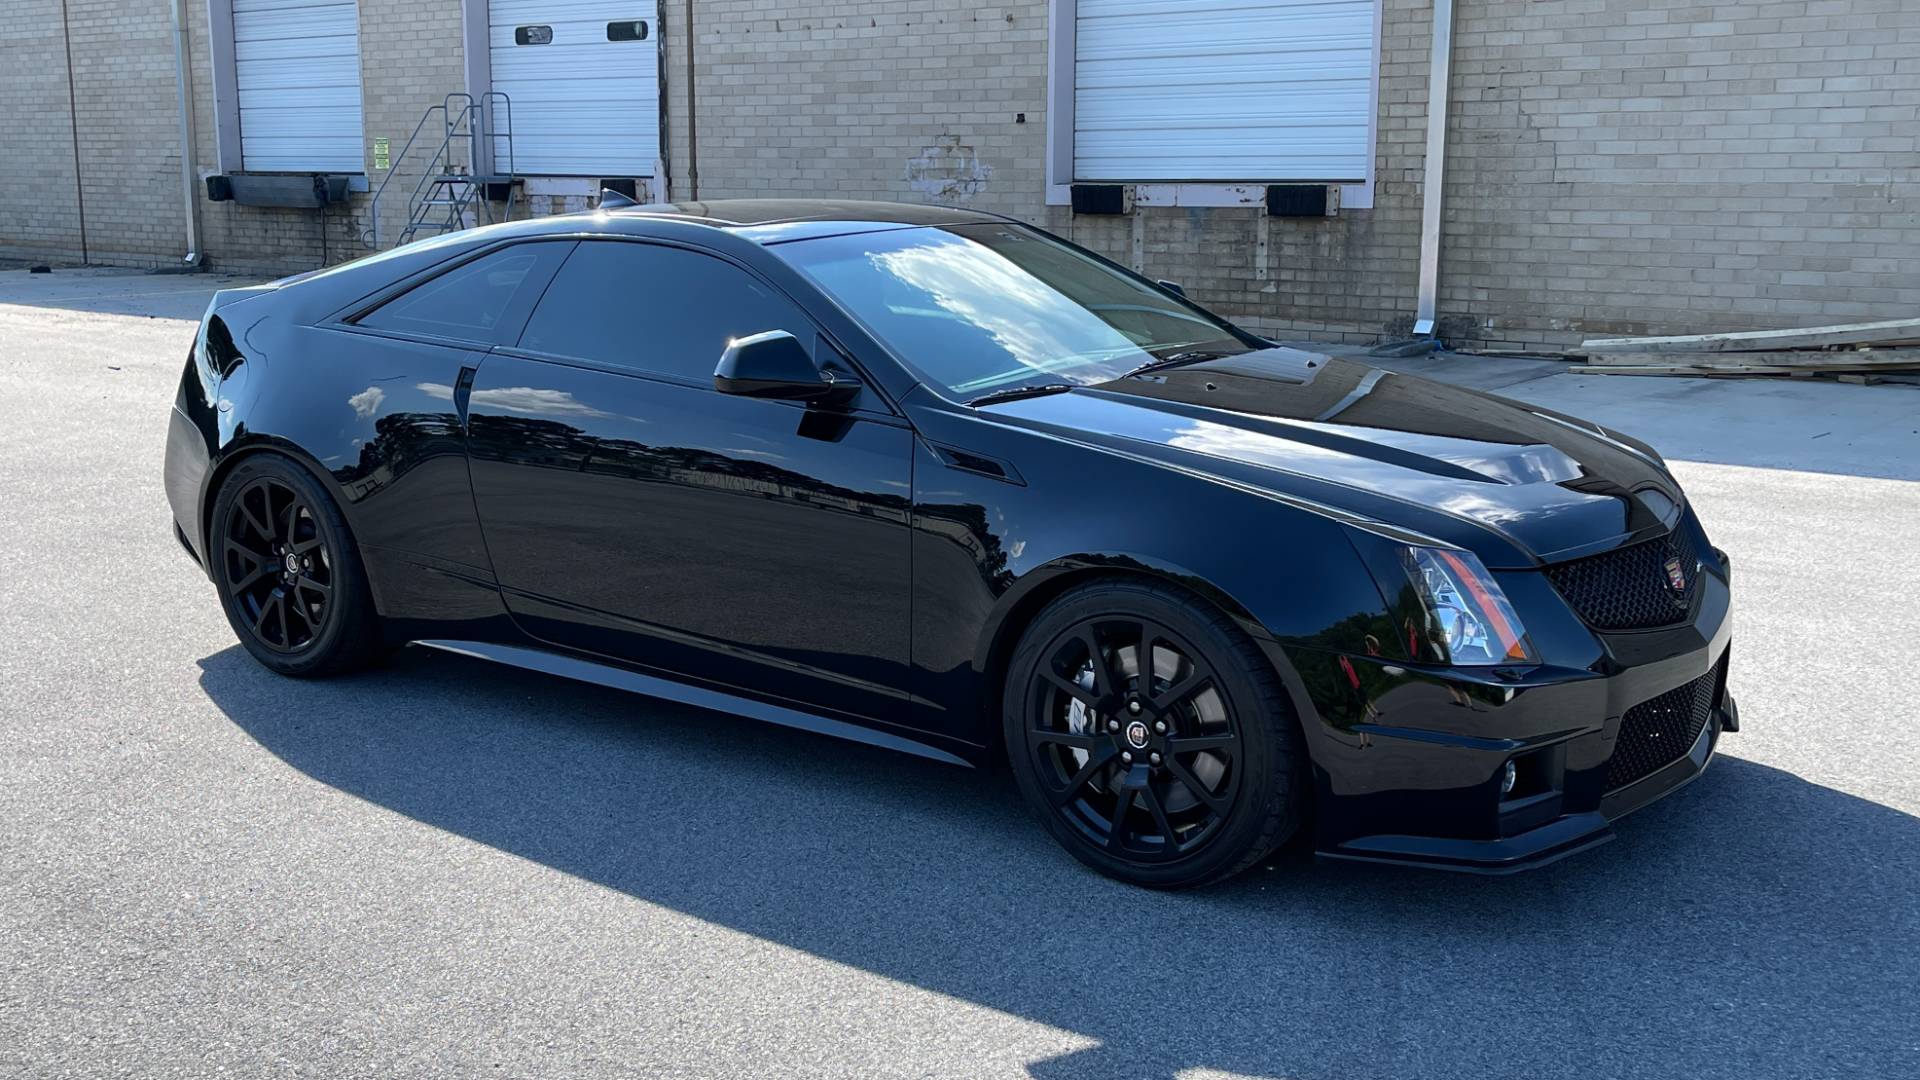 Used 2011 Cadillac CTS-V COUPE 6.2L 600HP+ / NAV / BOSE / SUNROOF / RECARO / 19IN WHLS / REARVIEW for sale $39,995 at Formula Imports in Charlotte NC 28227 9